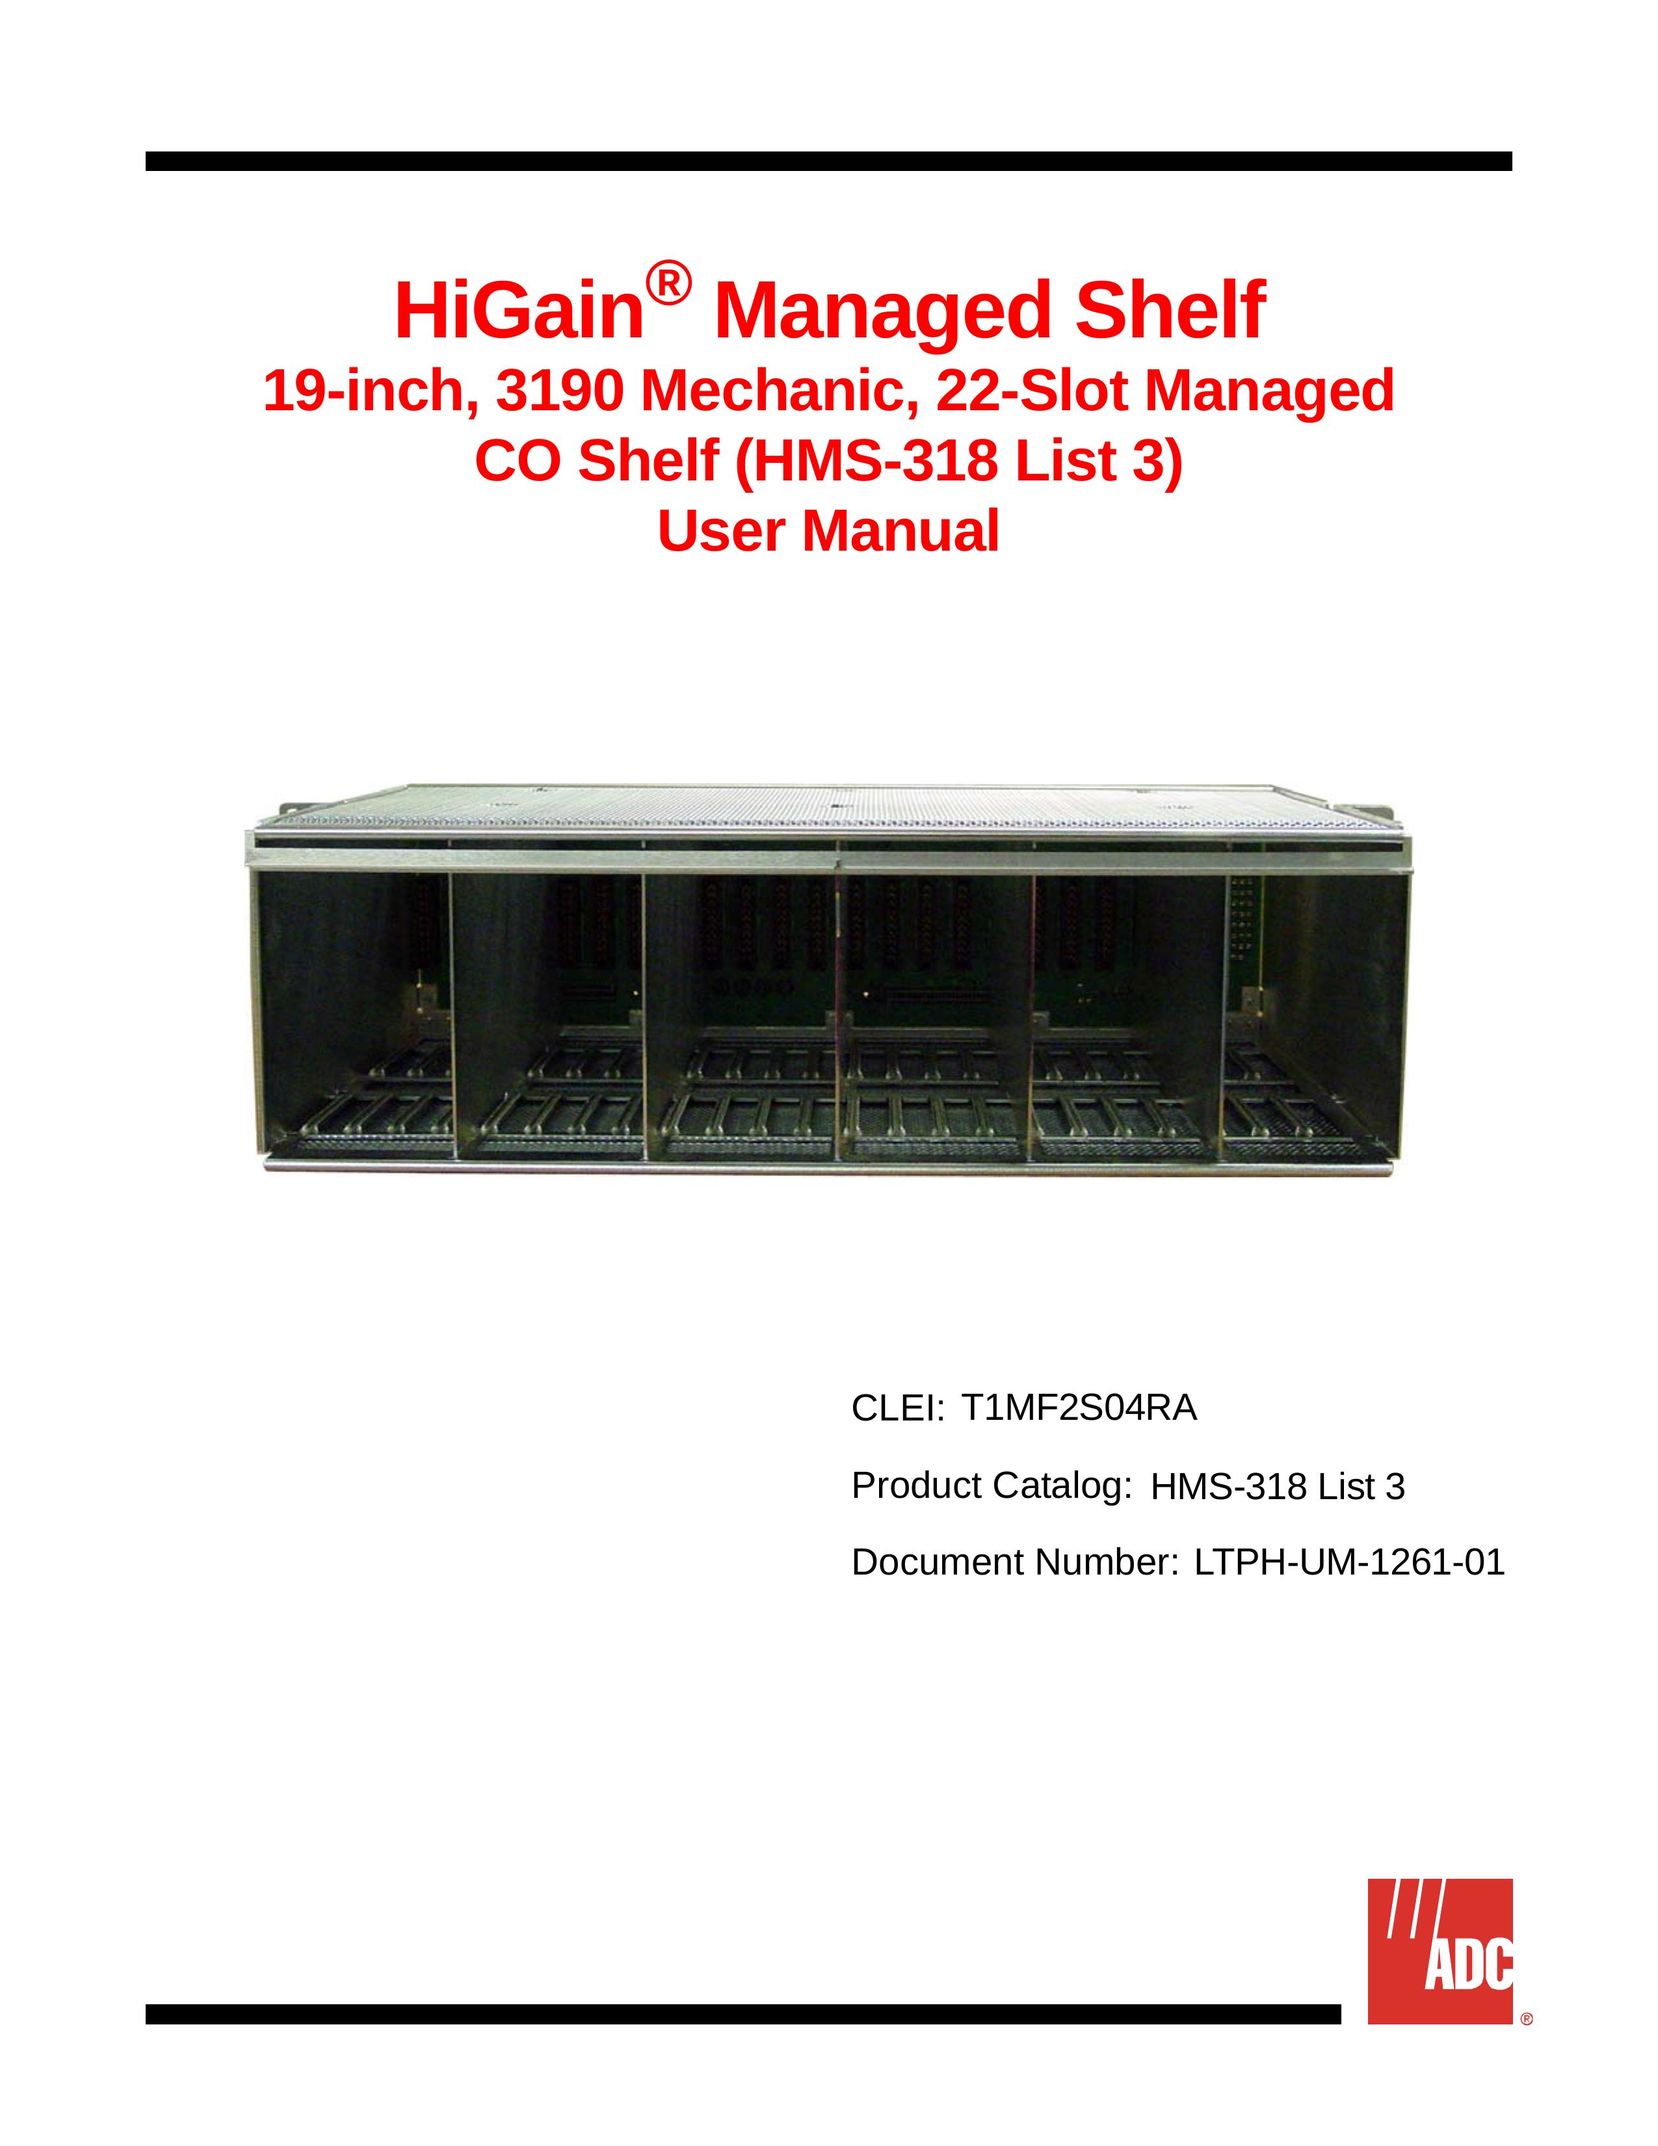 ADC HMS-318 Network Card User Manual